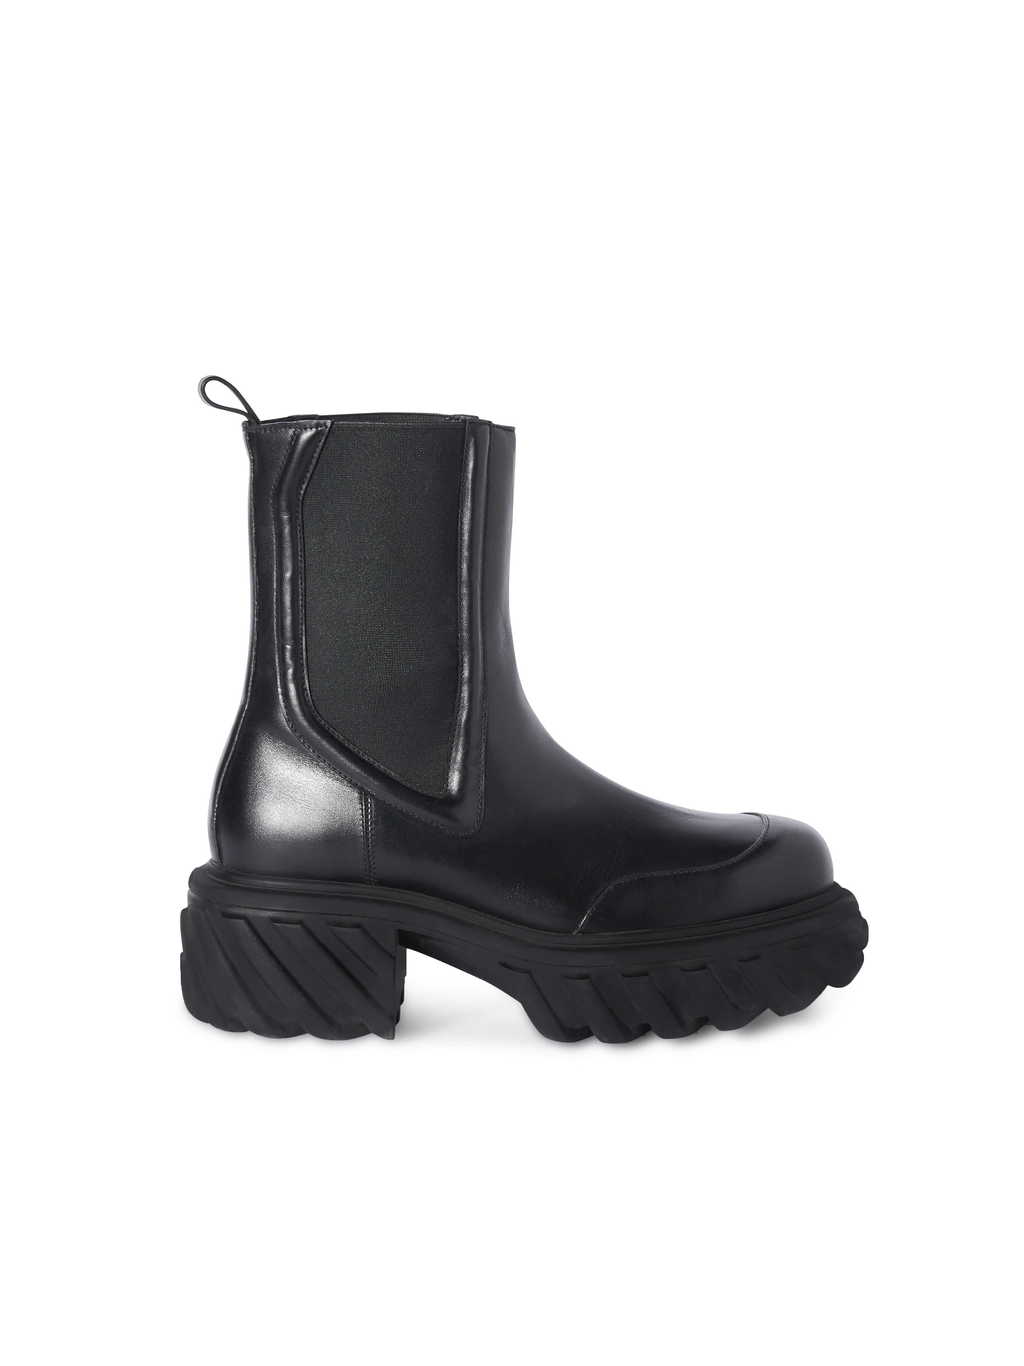 OFF-WHITE Women Tractor Motor Chelsea Boots